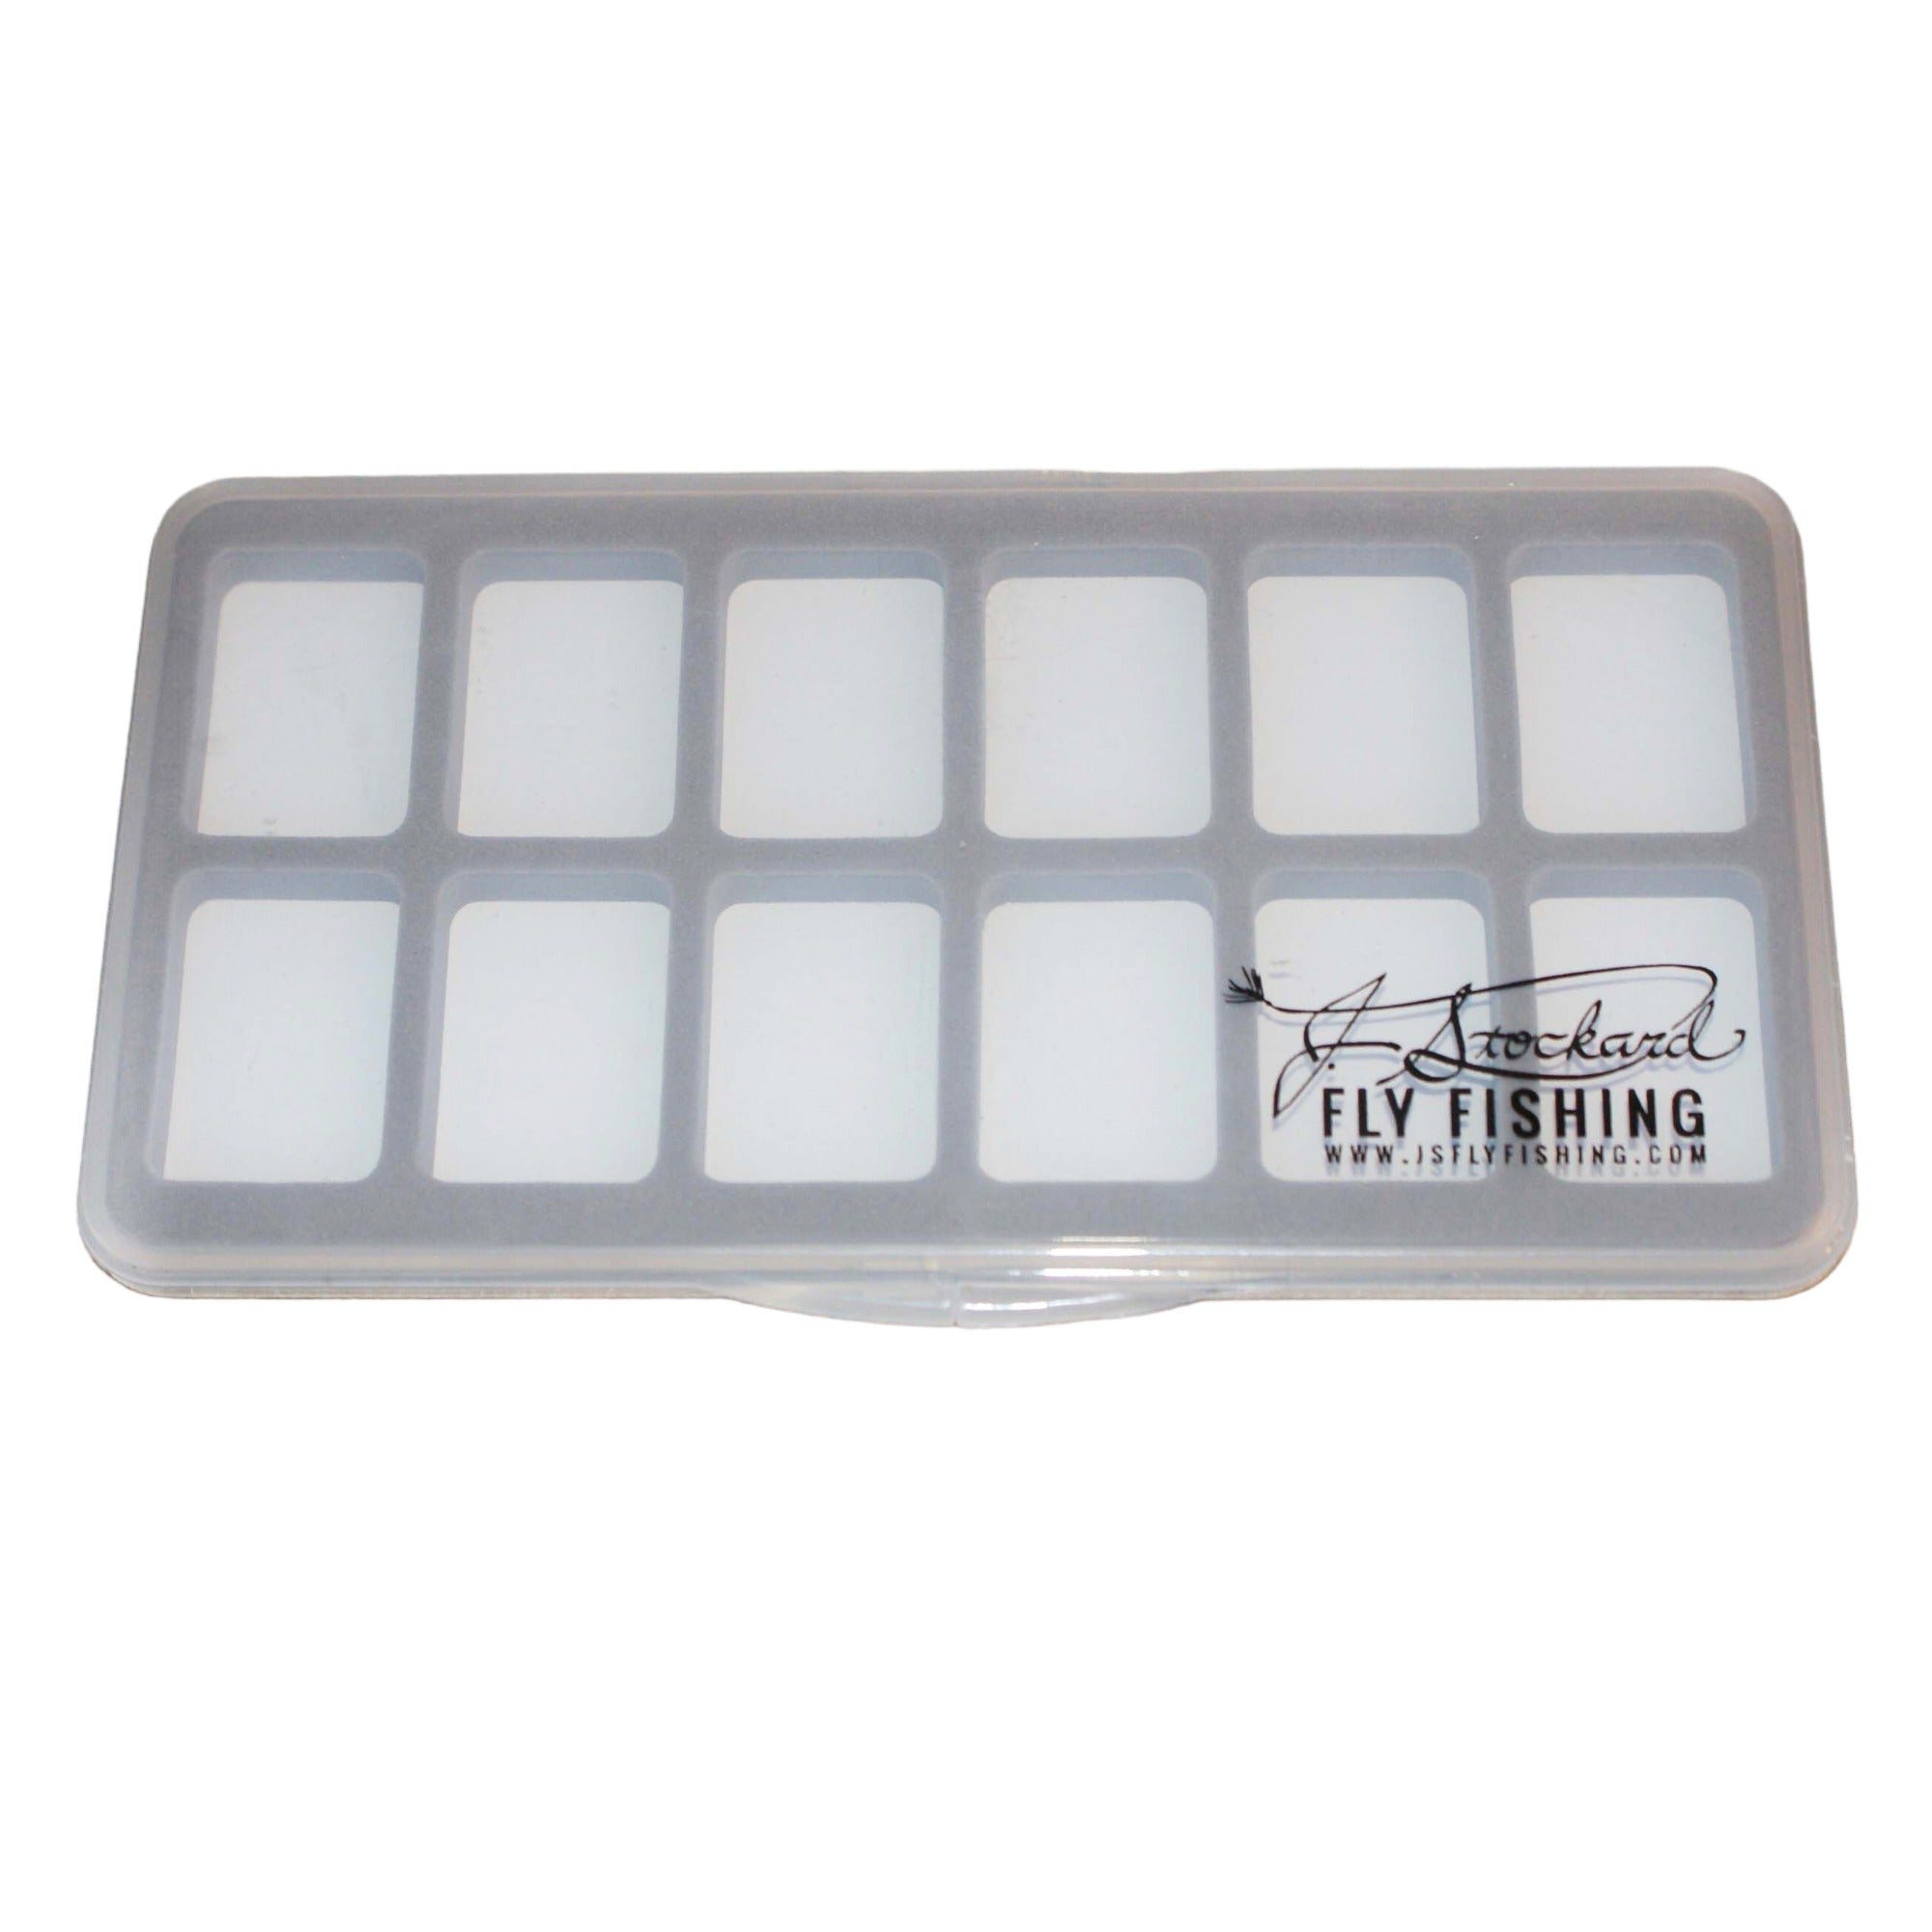 Maxcatch Super Slim Fly Boxes For Fly Fishing Flies Hooks Magnetic Pad  Compartments Clear Lid Fishing Tackle Box (12 Comp)